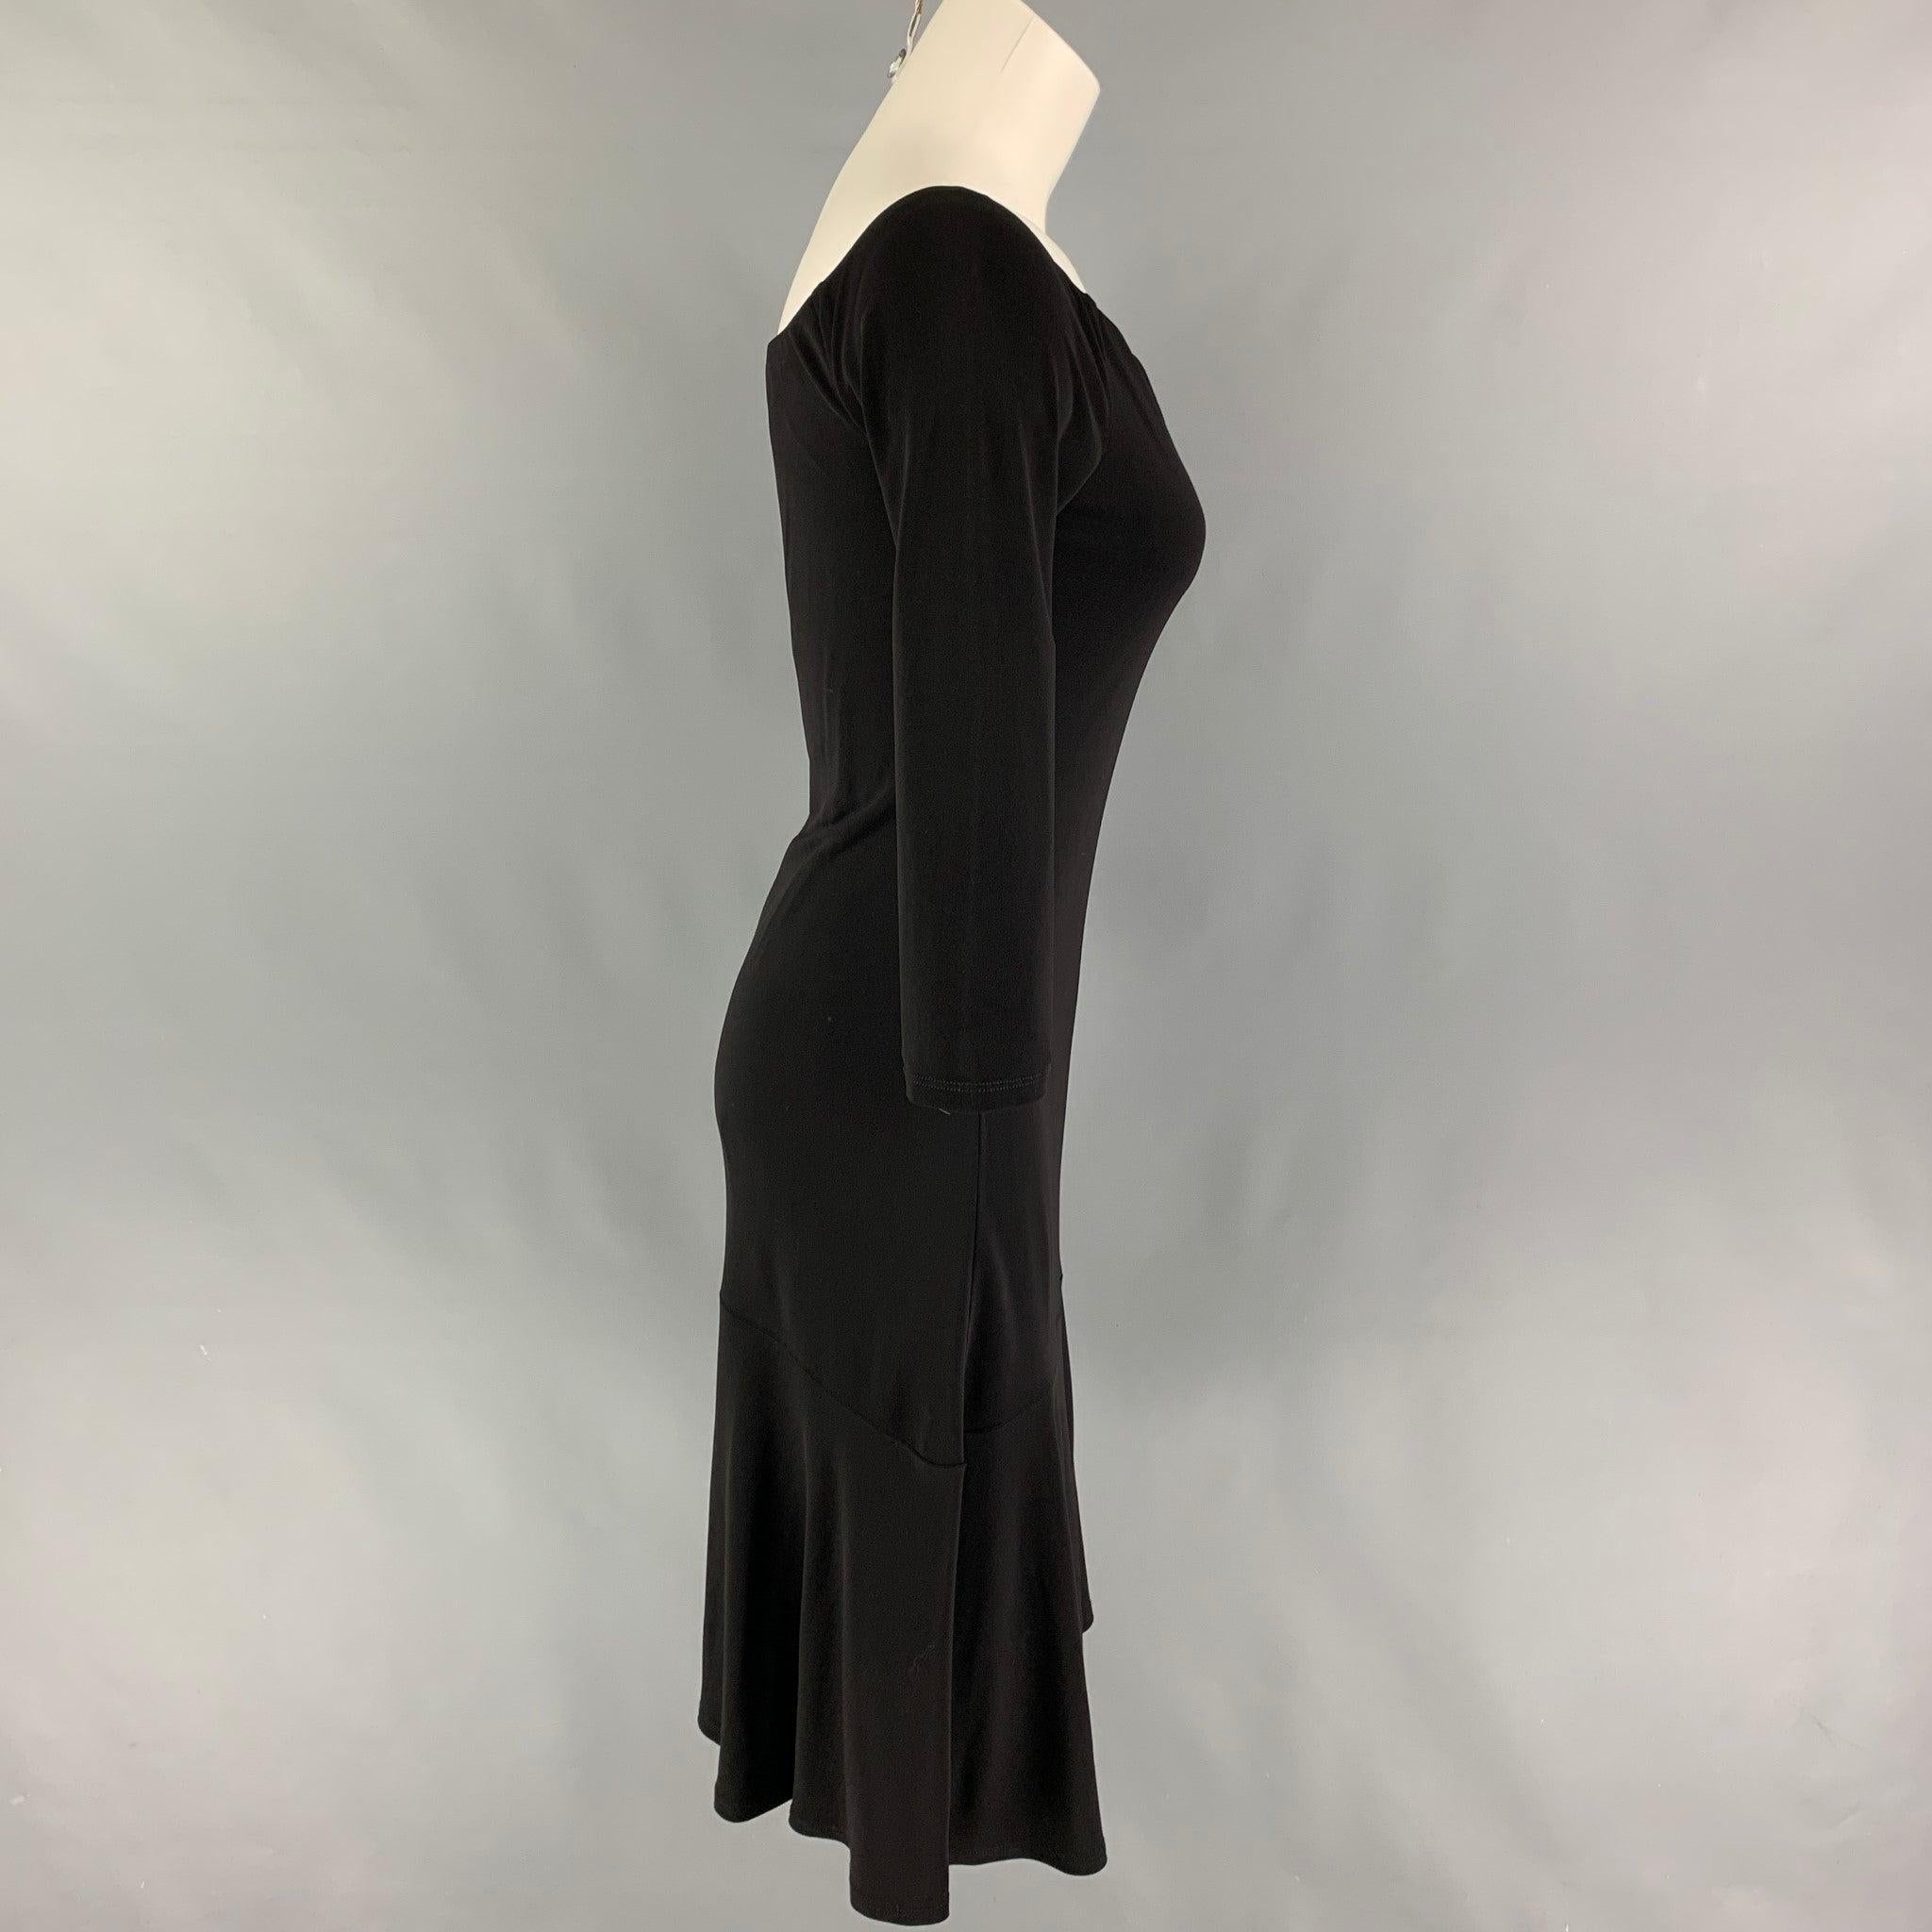 RALPH LAUREN 'Black Label' dress comes in a black viscose with a slip liner featuring a elastic collar hem and 3/4 sleeves.
Very Good
Pre-Owned Condition.
Logo tag removed.  

Marked:   Size tag removed.  

Measurements: 
  Bust: 28 inches  Waist: